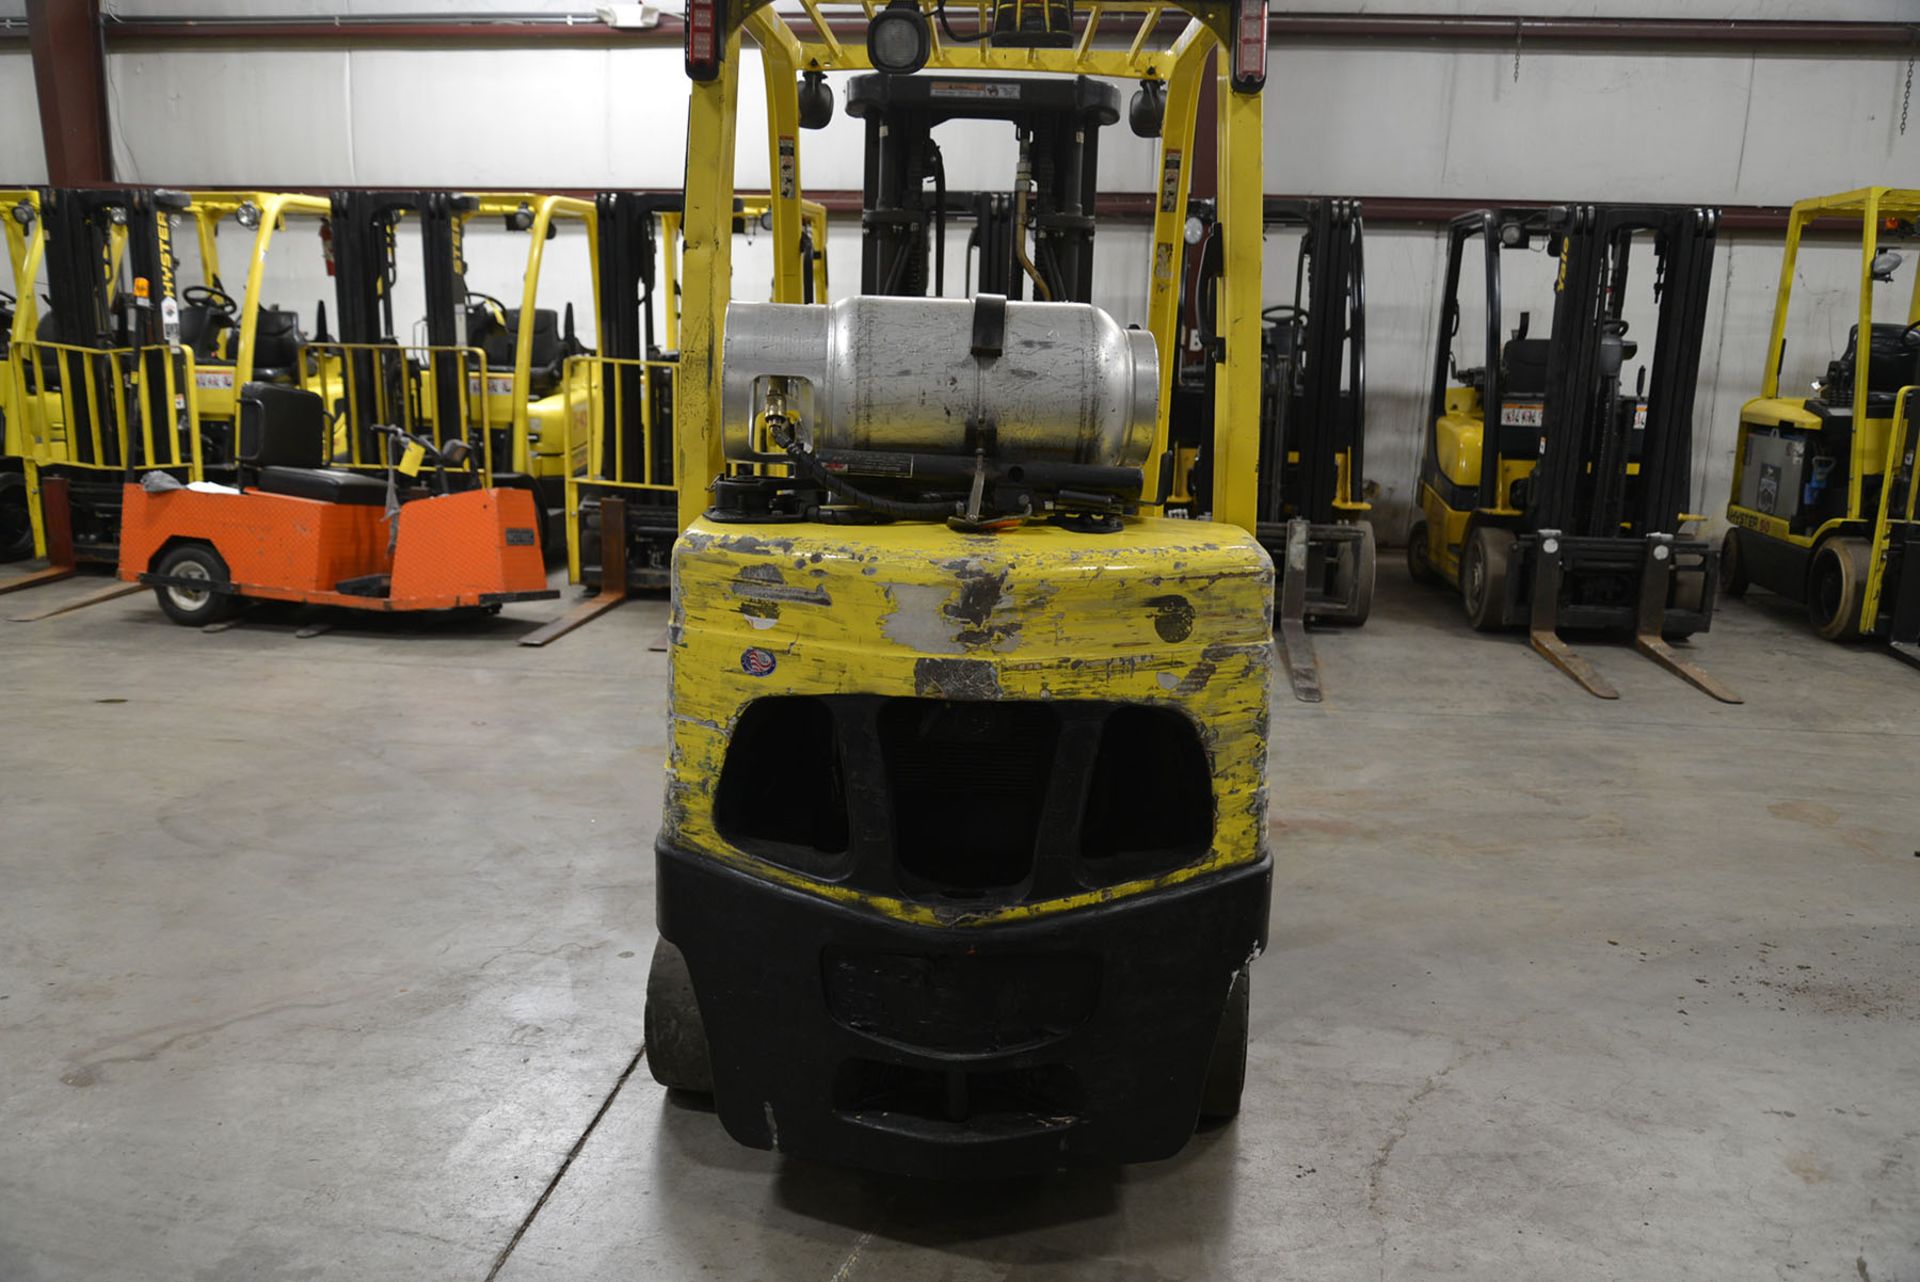 2009 HYSTER 7,000-LB., MODEL: S70FT, SN: F187V14683G, LPG, SOLID TIRES, 3-STAGE MAST, 182'' LIFT - Image 4 of 6